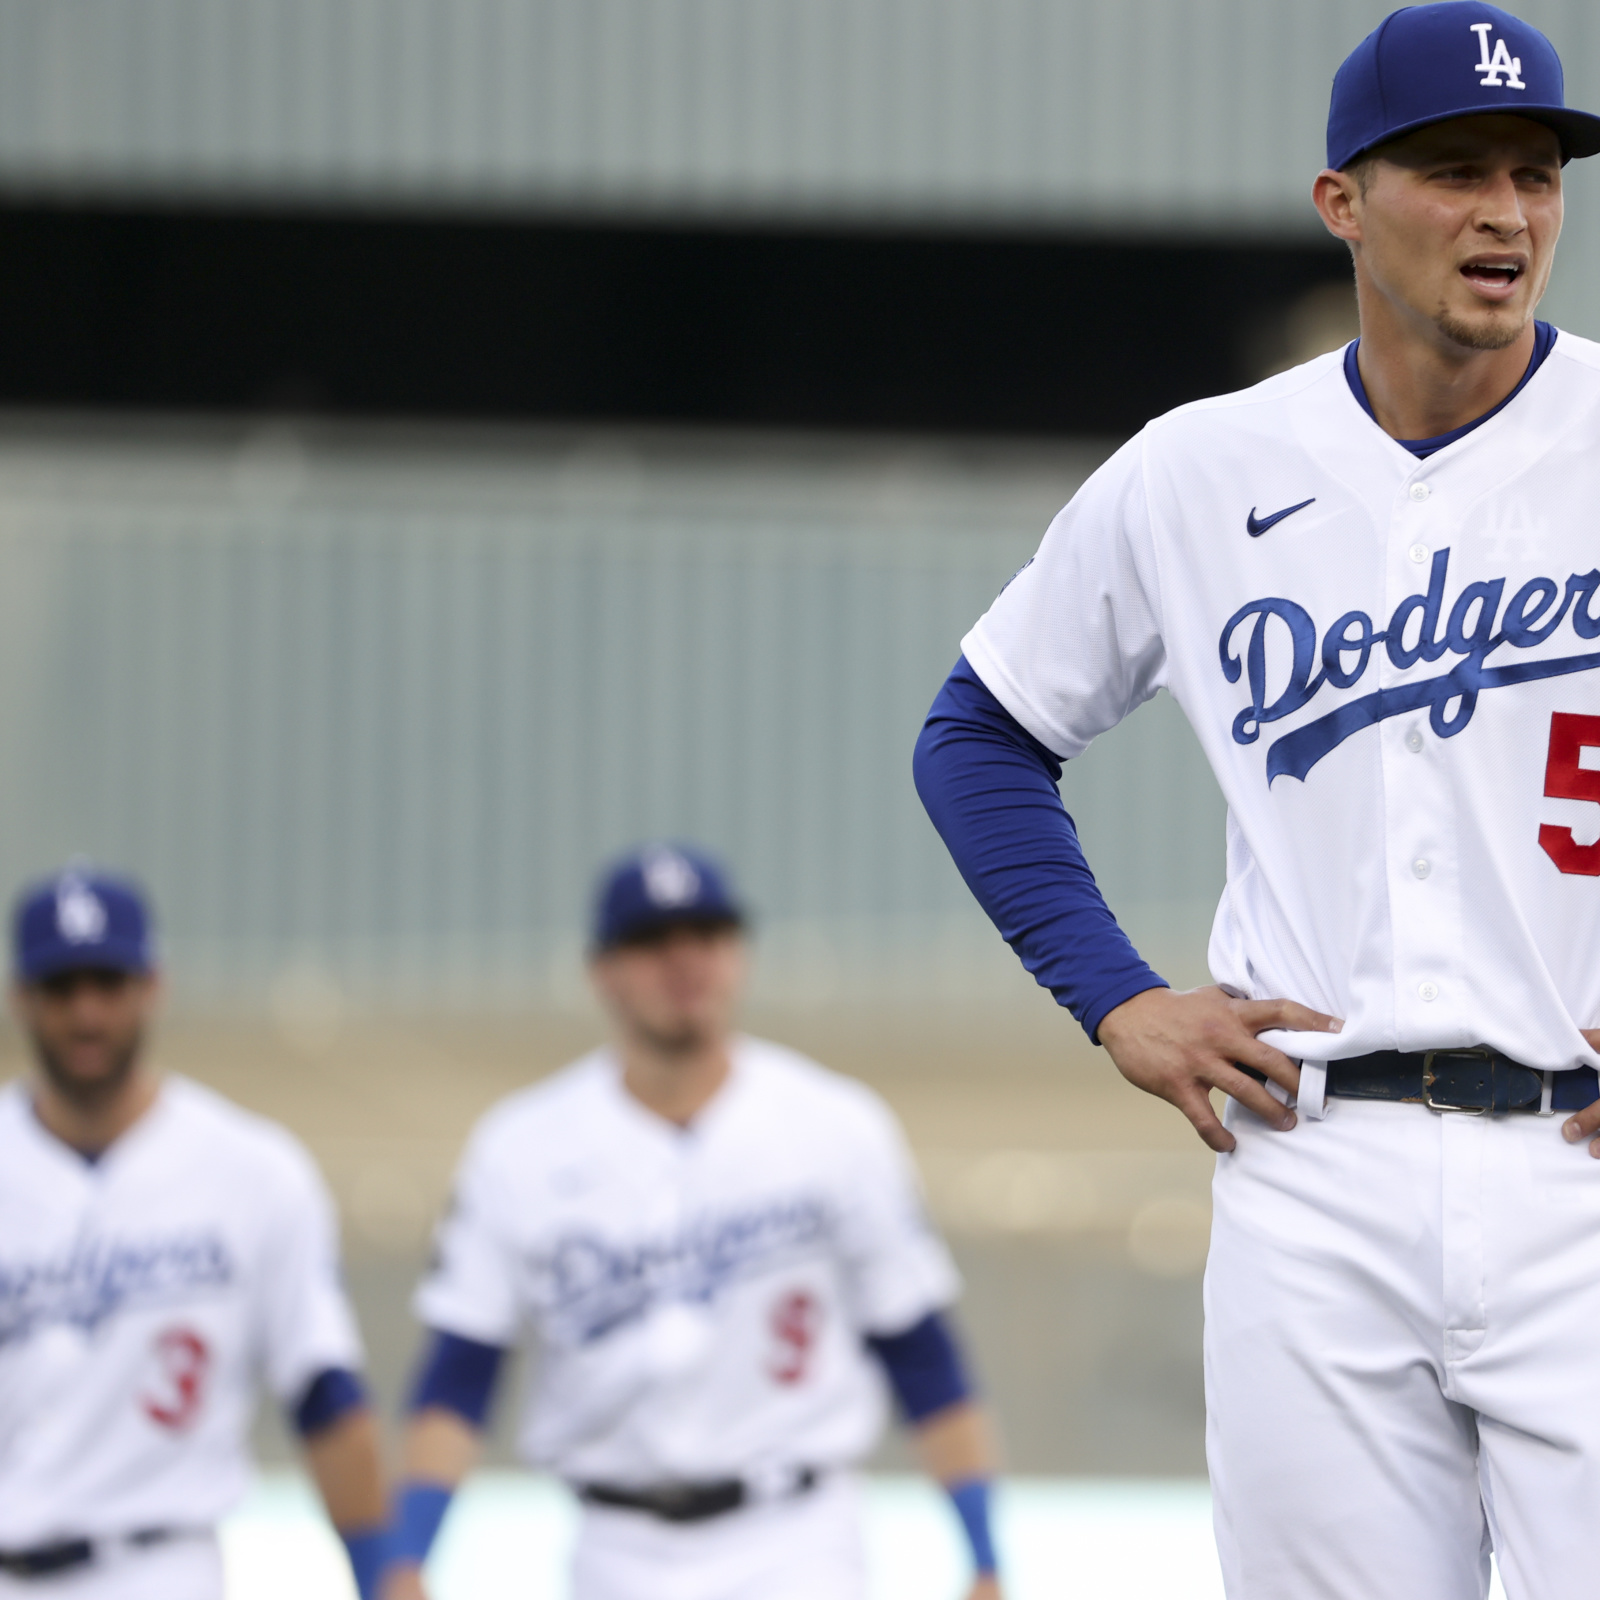 Rangers snatch Corey Seager from Dodgers with 10-year, $325